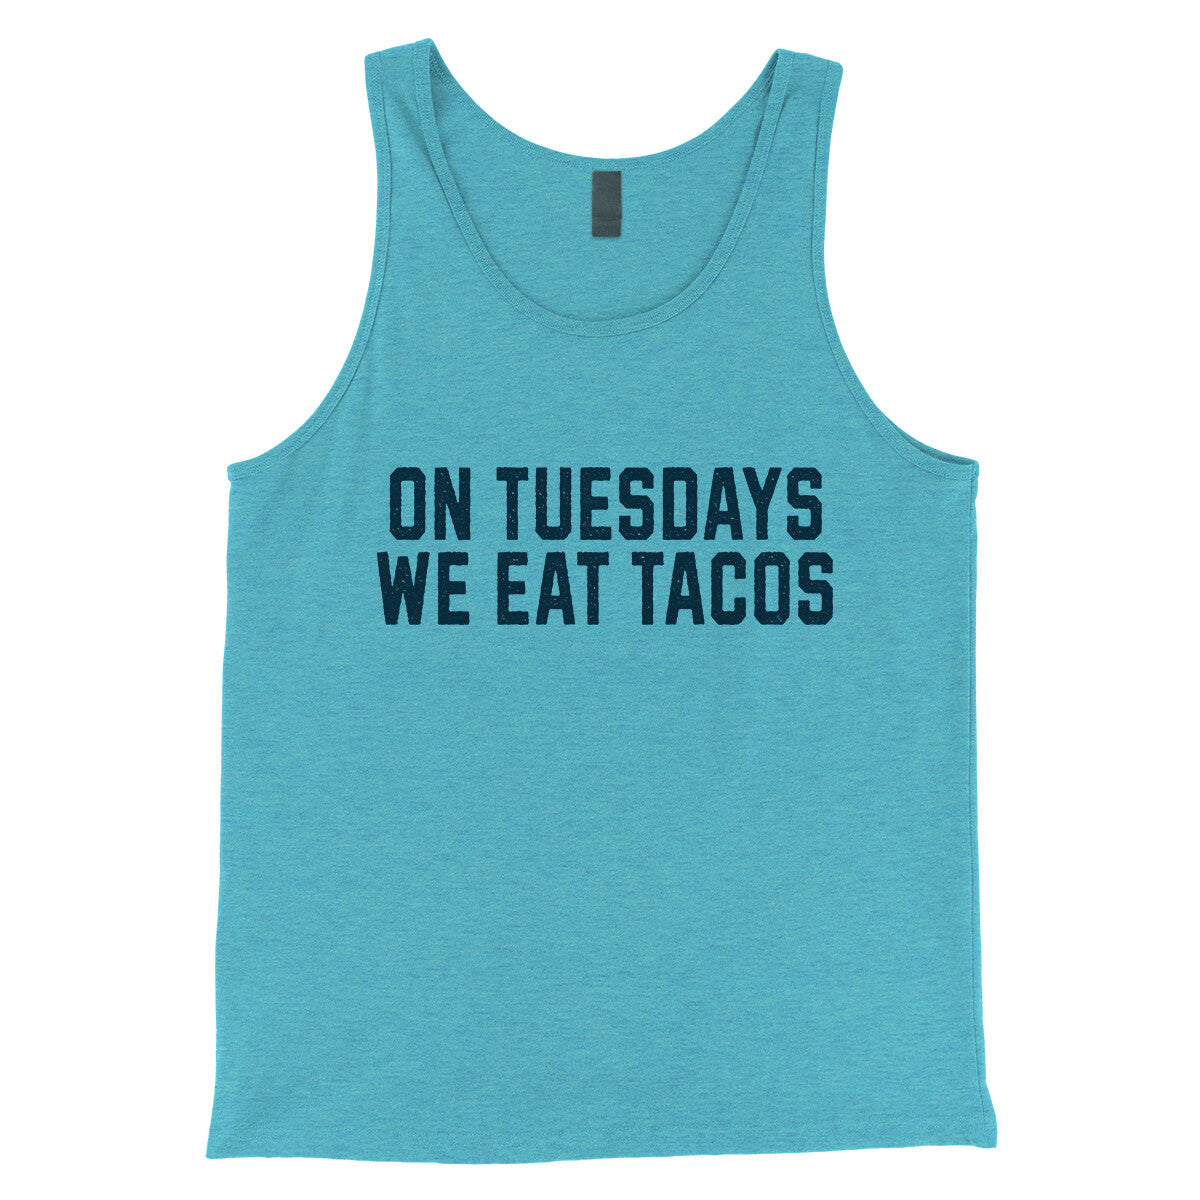 On Tuesdays We Eat Tacos in Aqua Triblend Color